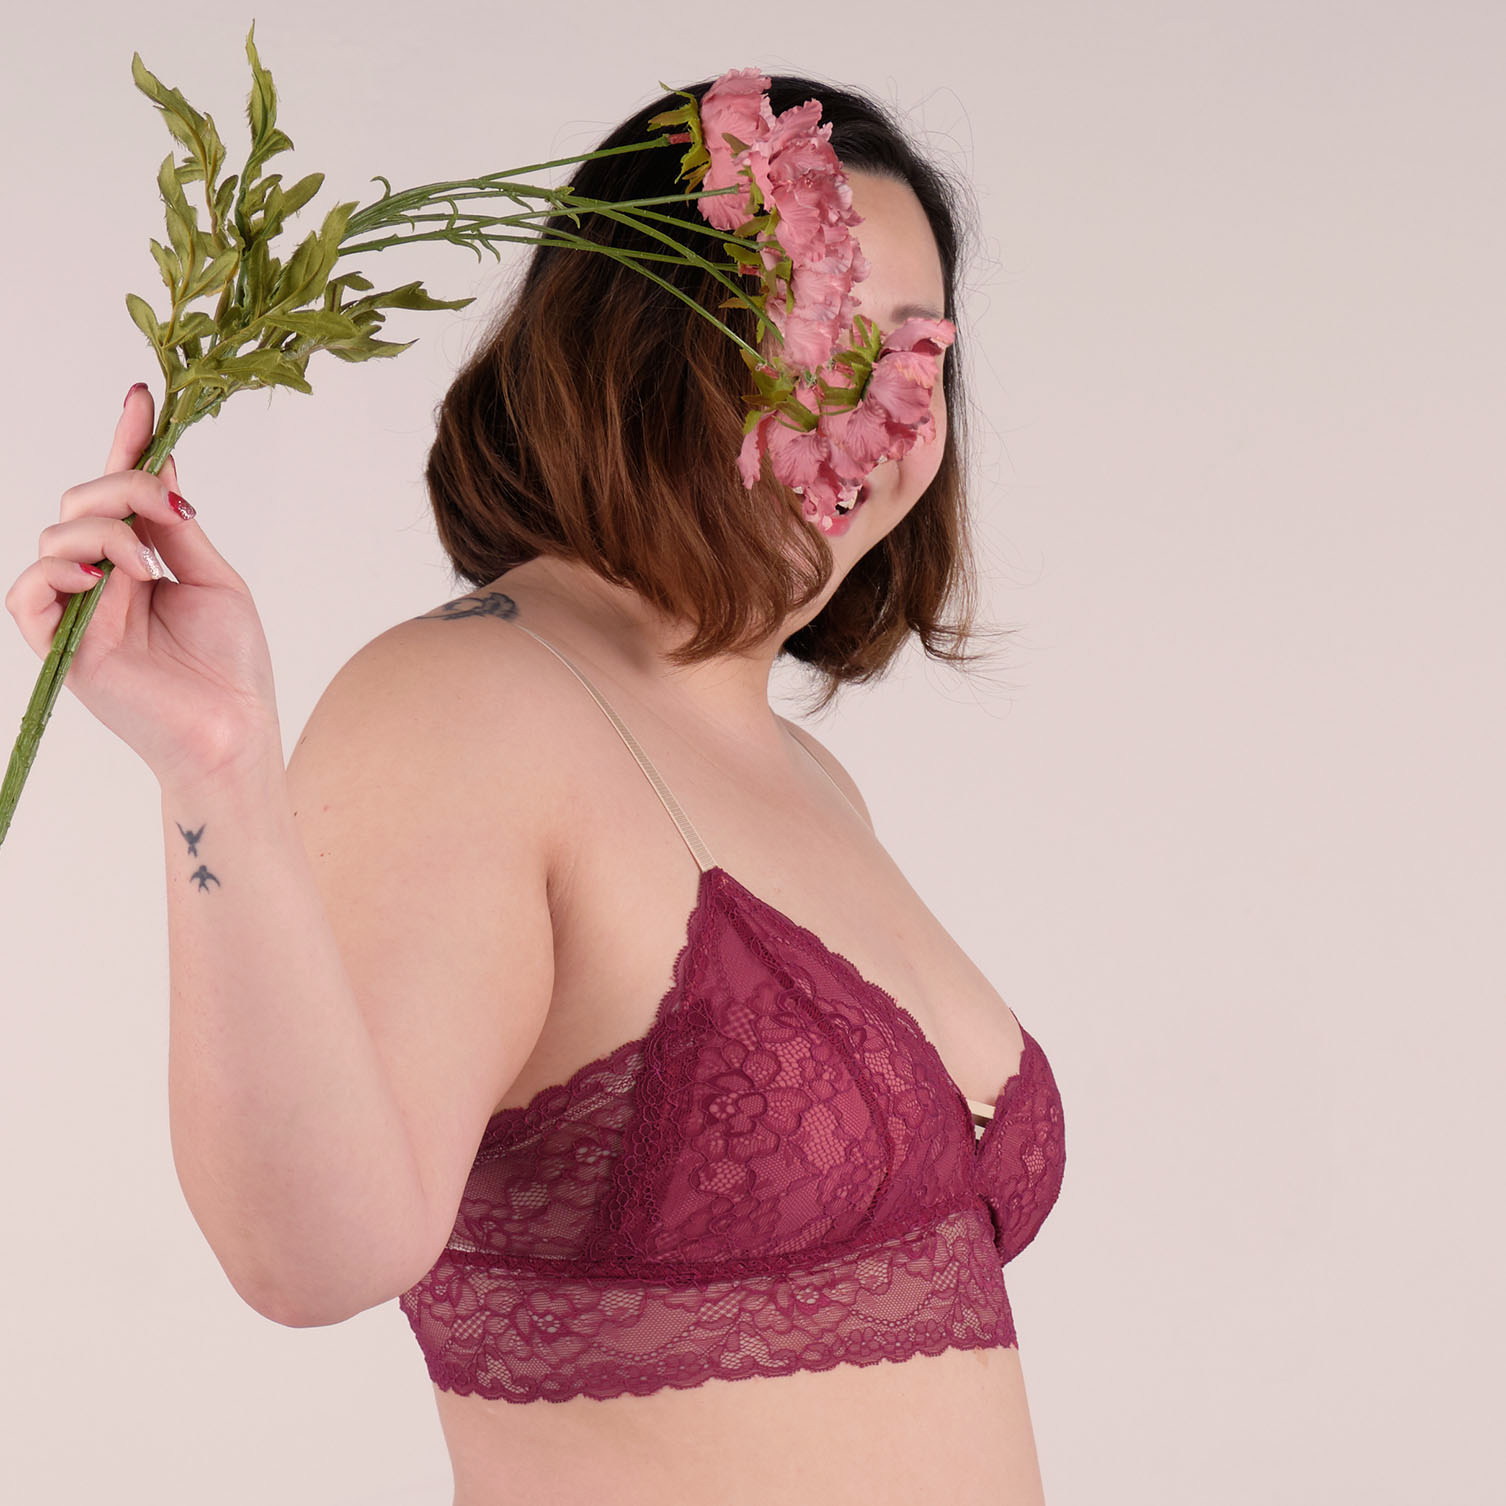 baby-fair Our Bralette Club The Best Wishes Padded Nursing Bralette in Pomegranate 